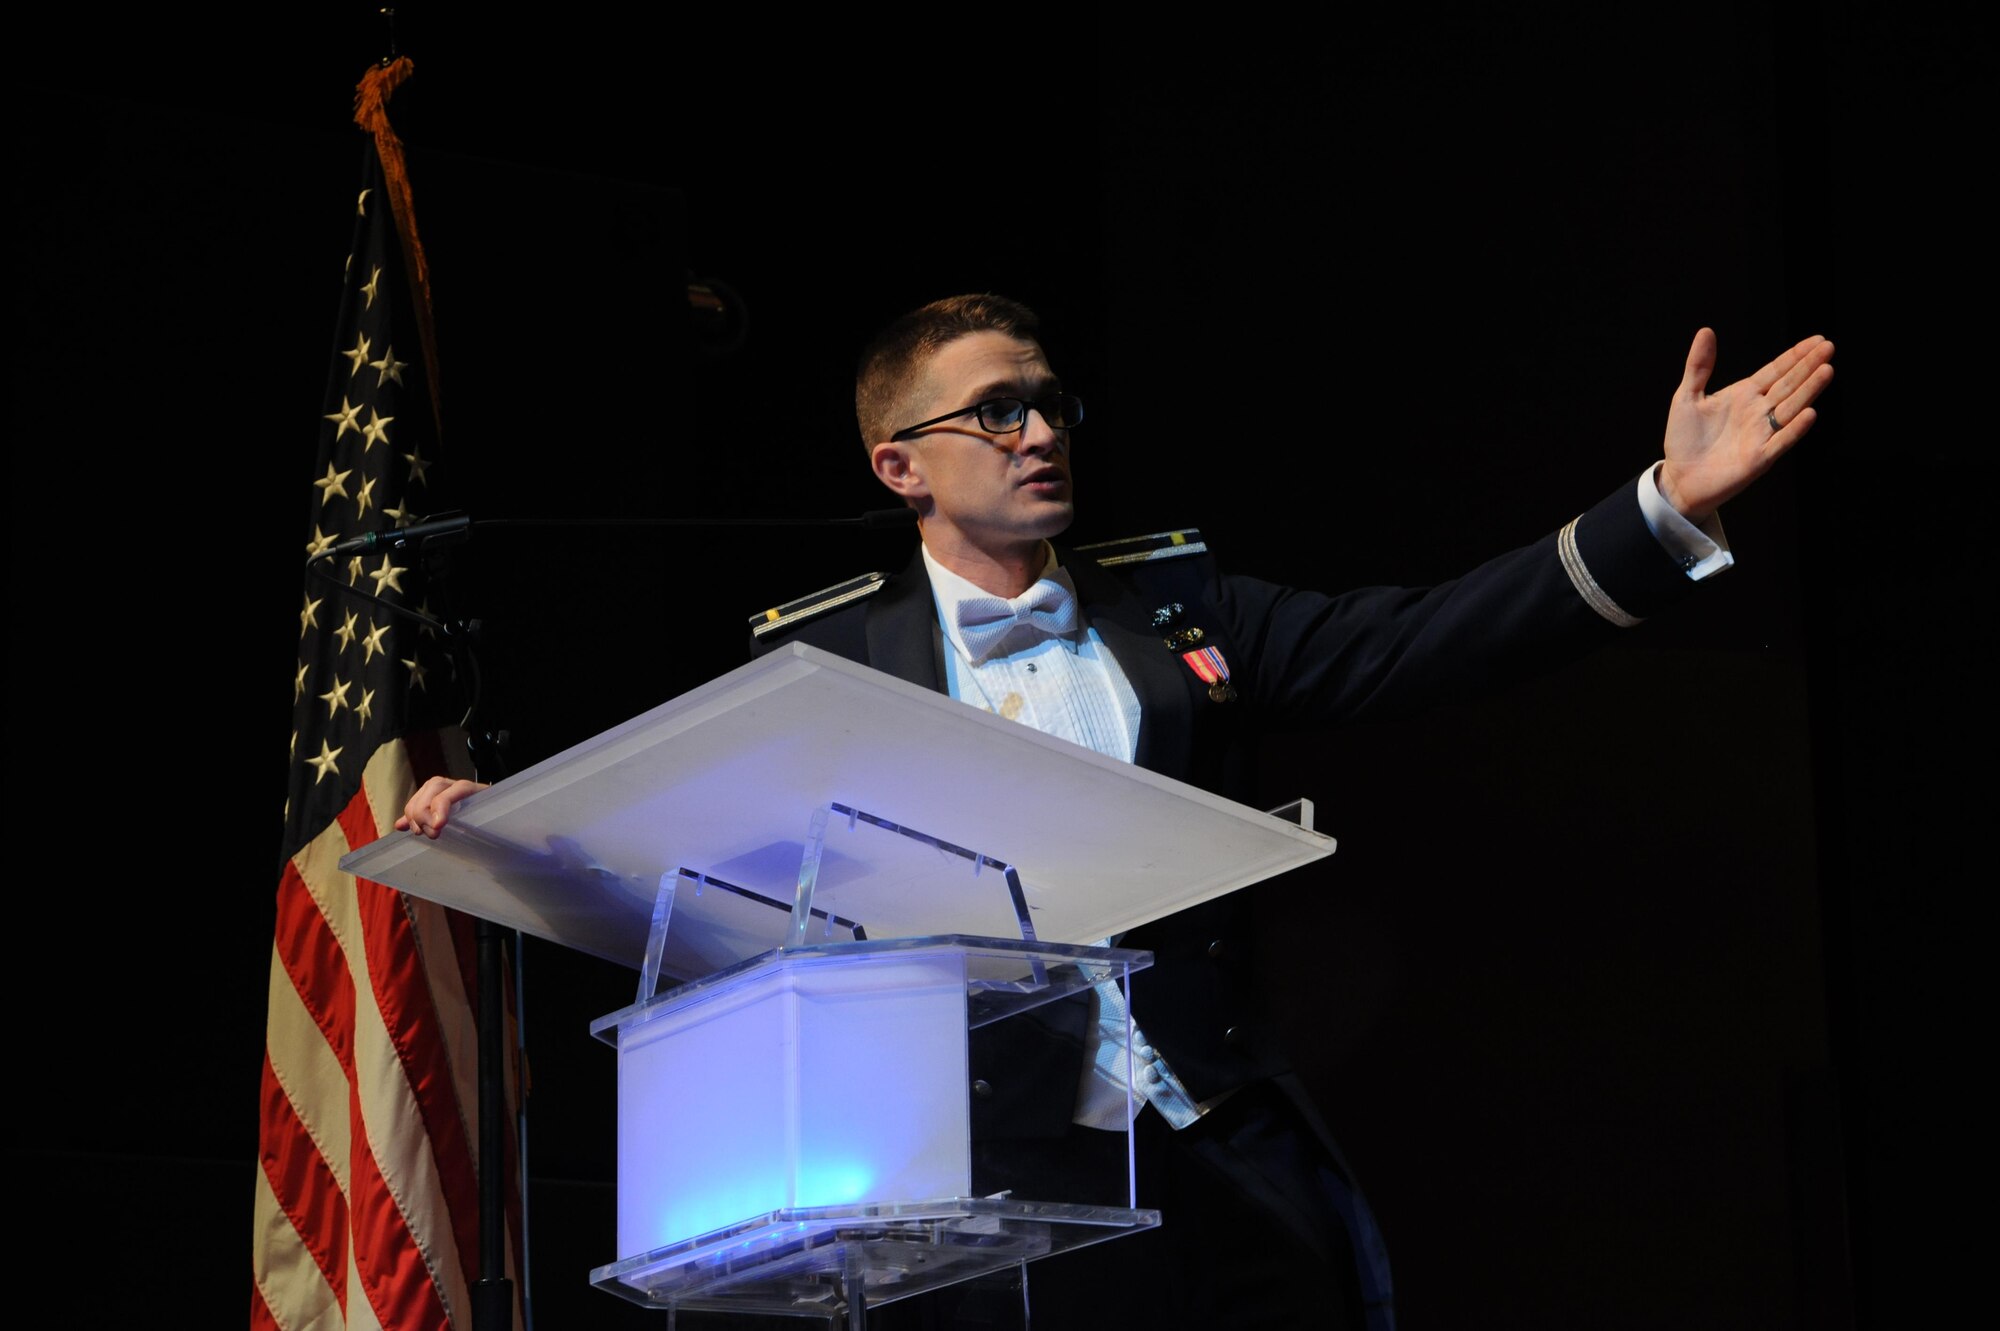 2nd Lt. Philip Emery, U.S. Air Force Heritage of America Band flight commander and associate conductor, speaks during a USAF HOAB 75th Anniversary Band Concert at the Ferguson Center for the Arts in Newport News, Va., Oct. 1, 2016. Since its creation, the band has represented the Air Force at musical and military events. This concert represented the band’s 75 years of heritage since it was first established in 1941. (U.S. Air Force photo by Staff Sgt. Nick Wilson)